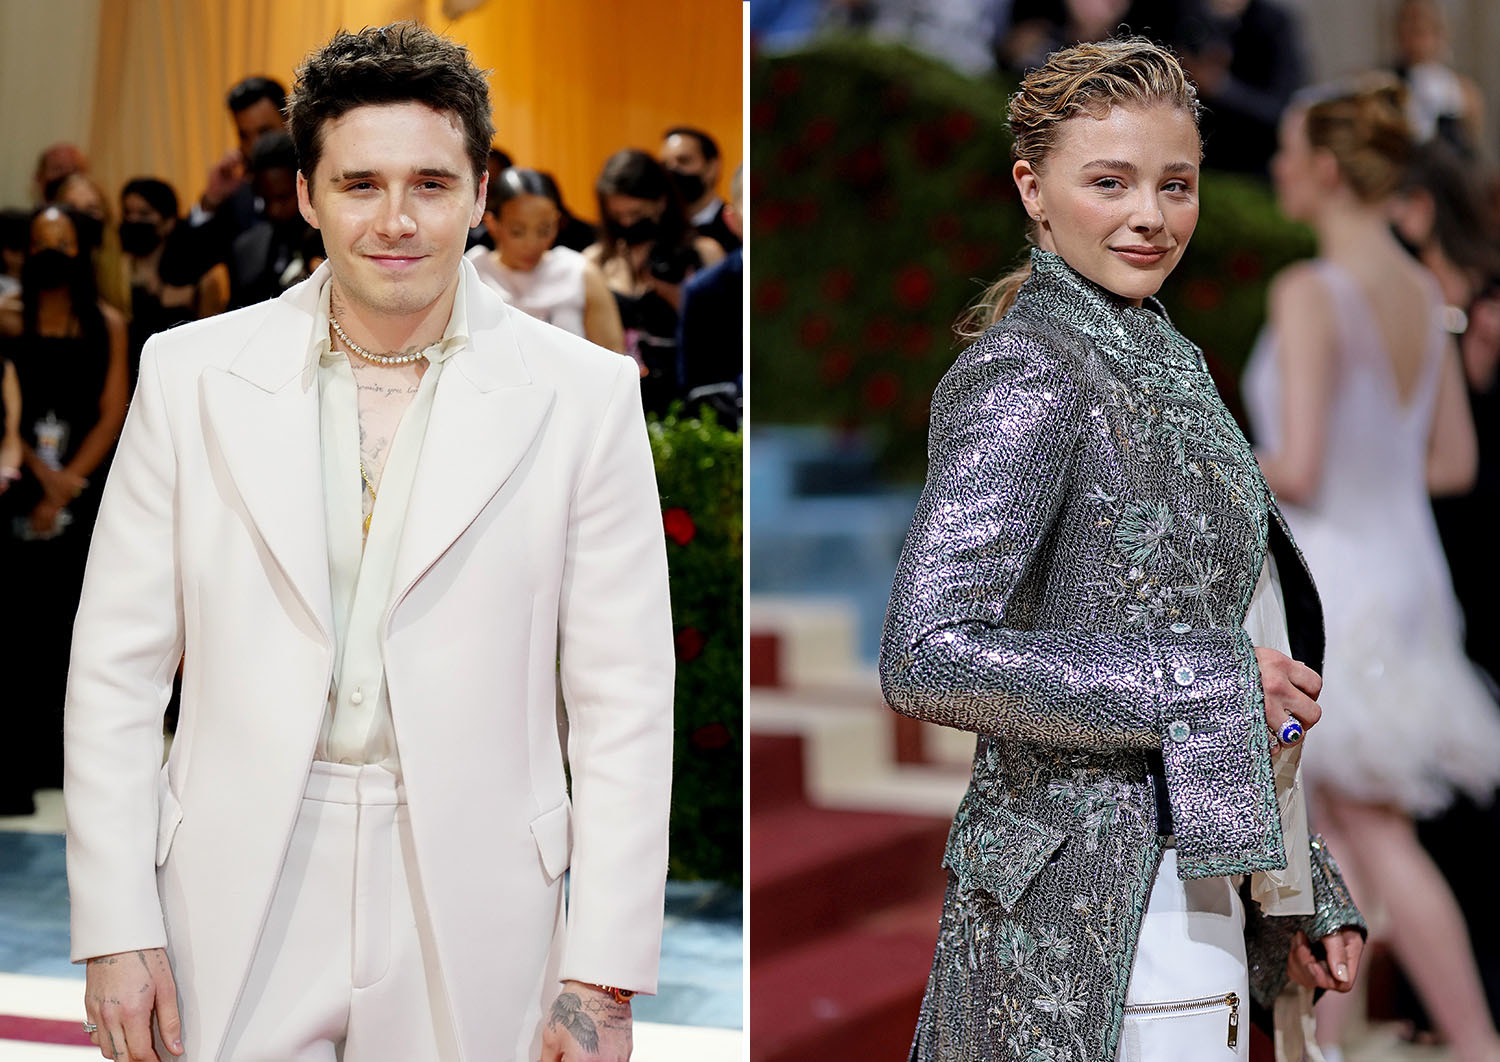 Brooklyn Beckham stands and smiles on the red carpet; Chloe Grace Moretz stands to the side and smiles